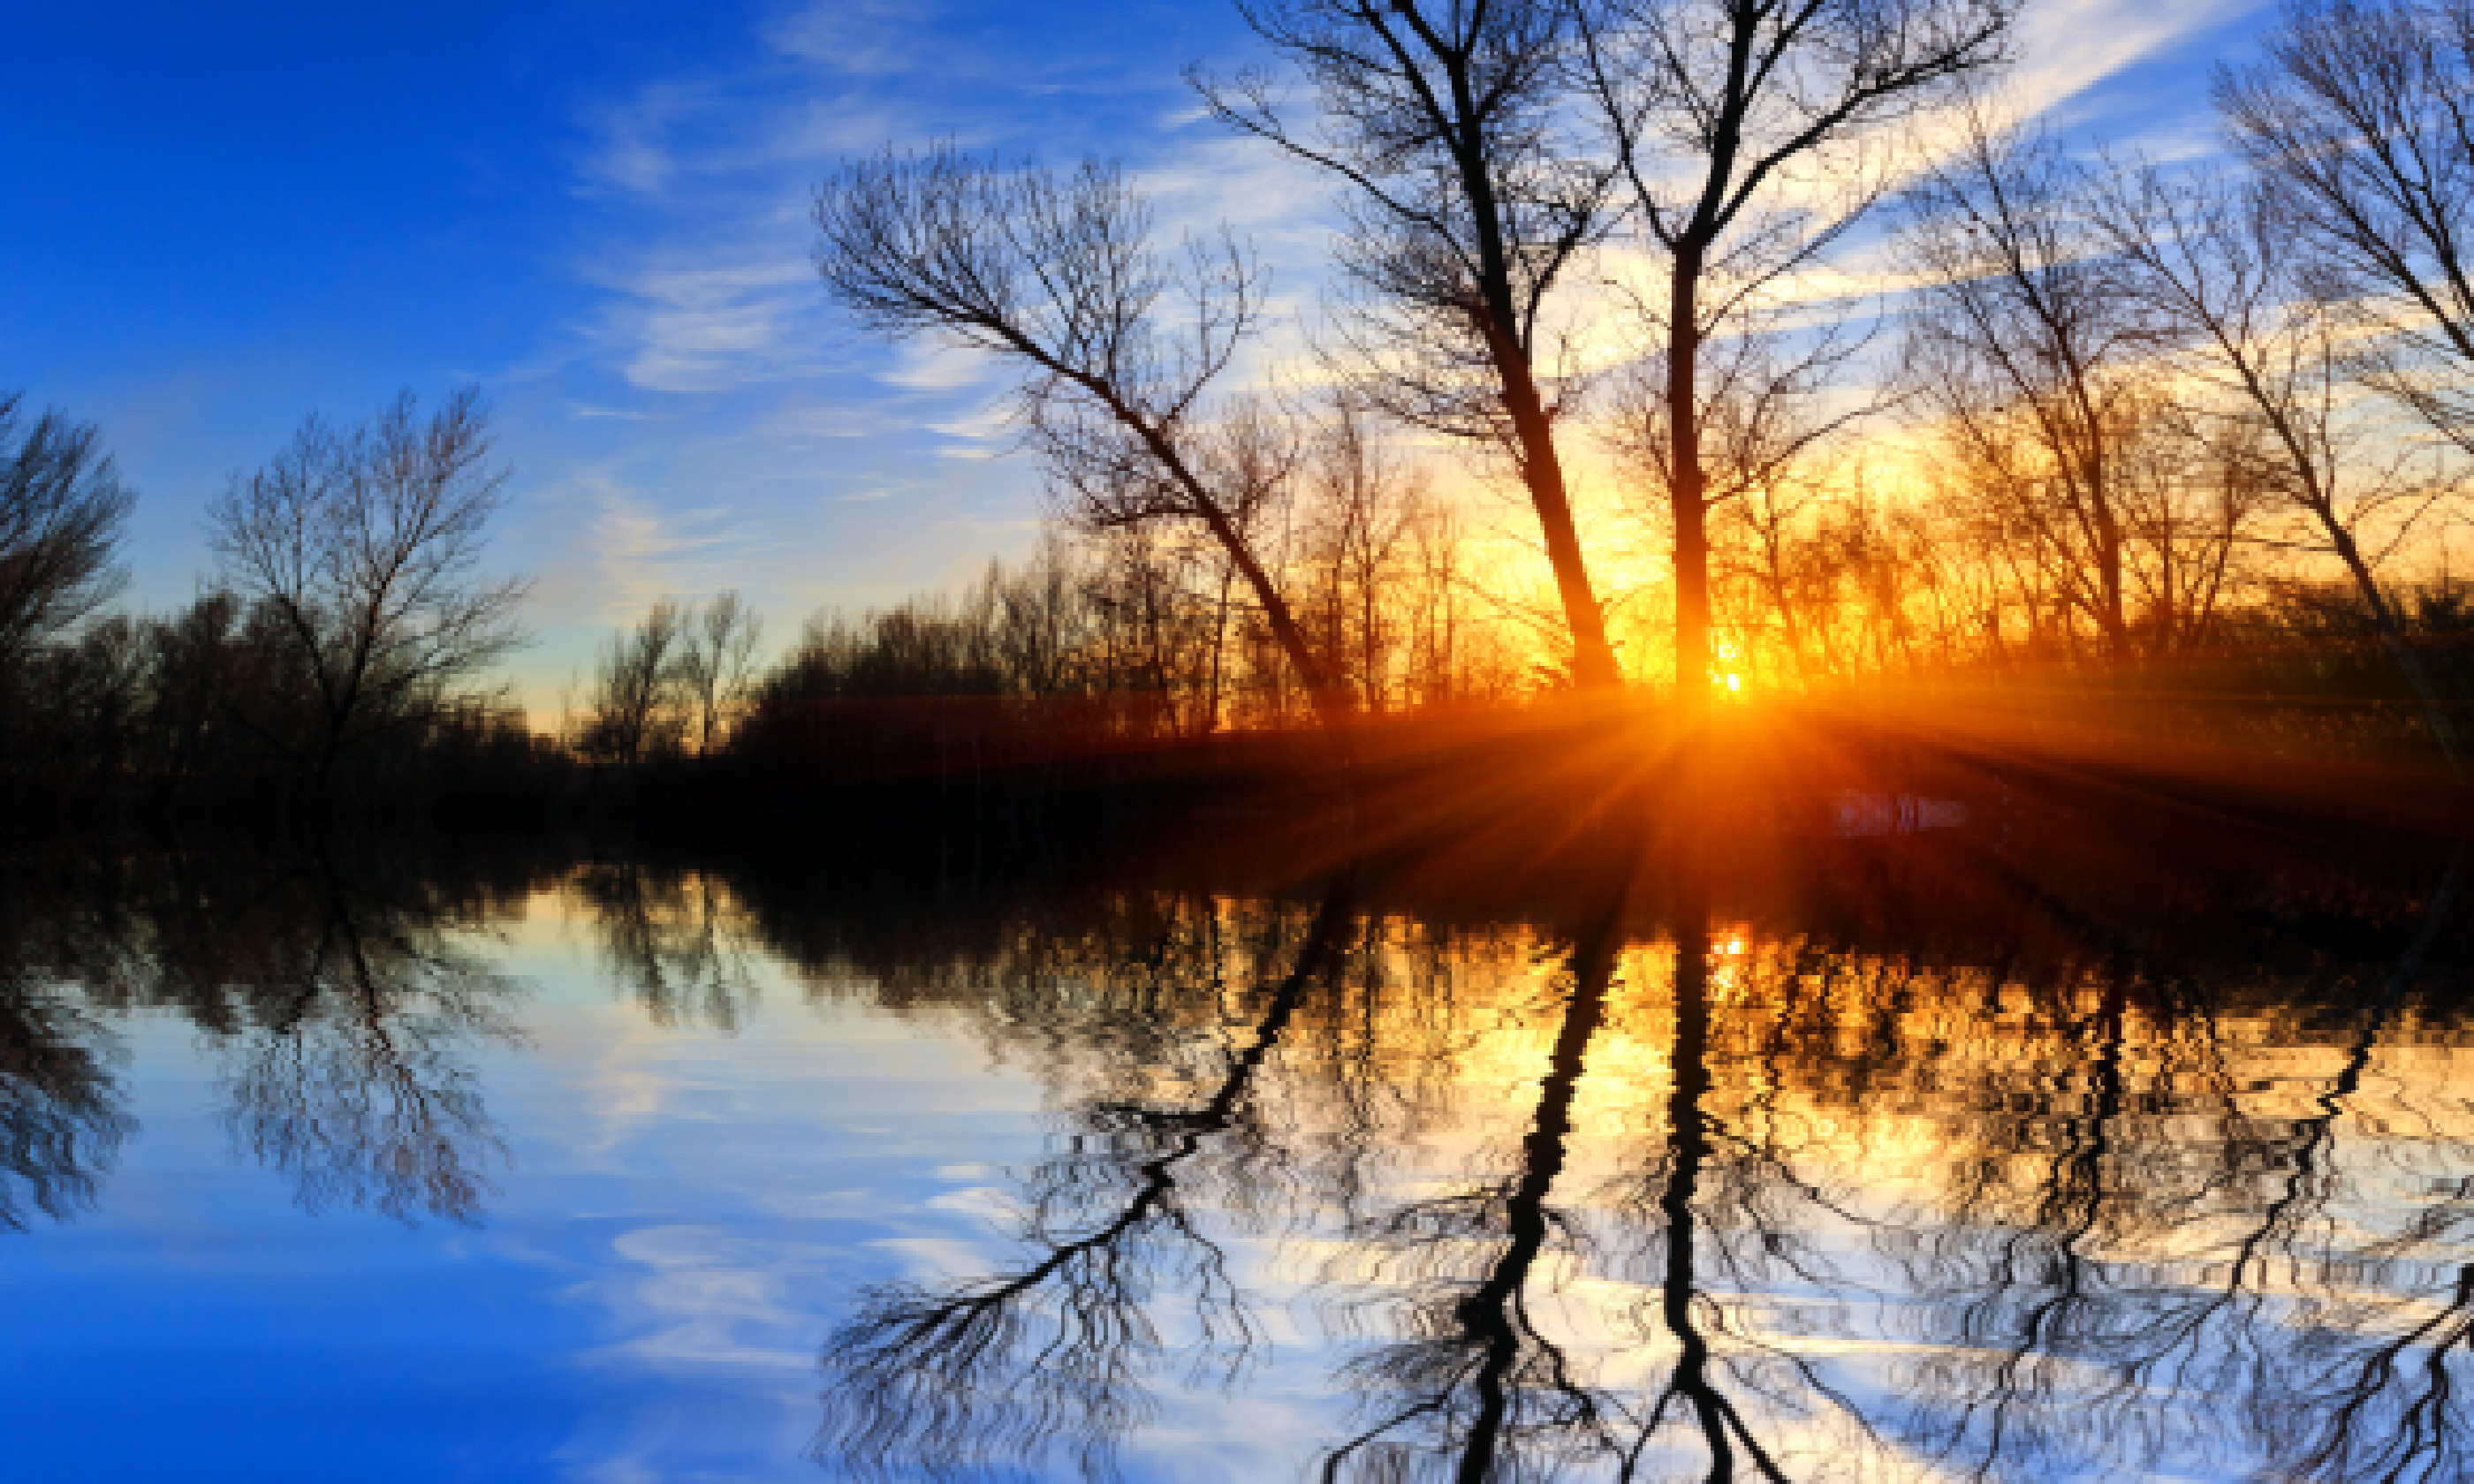 Leafless tree on sunset background (Shutterstock: See credit below)